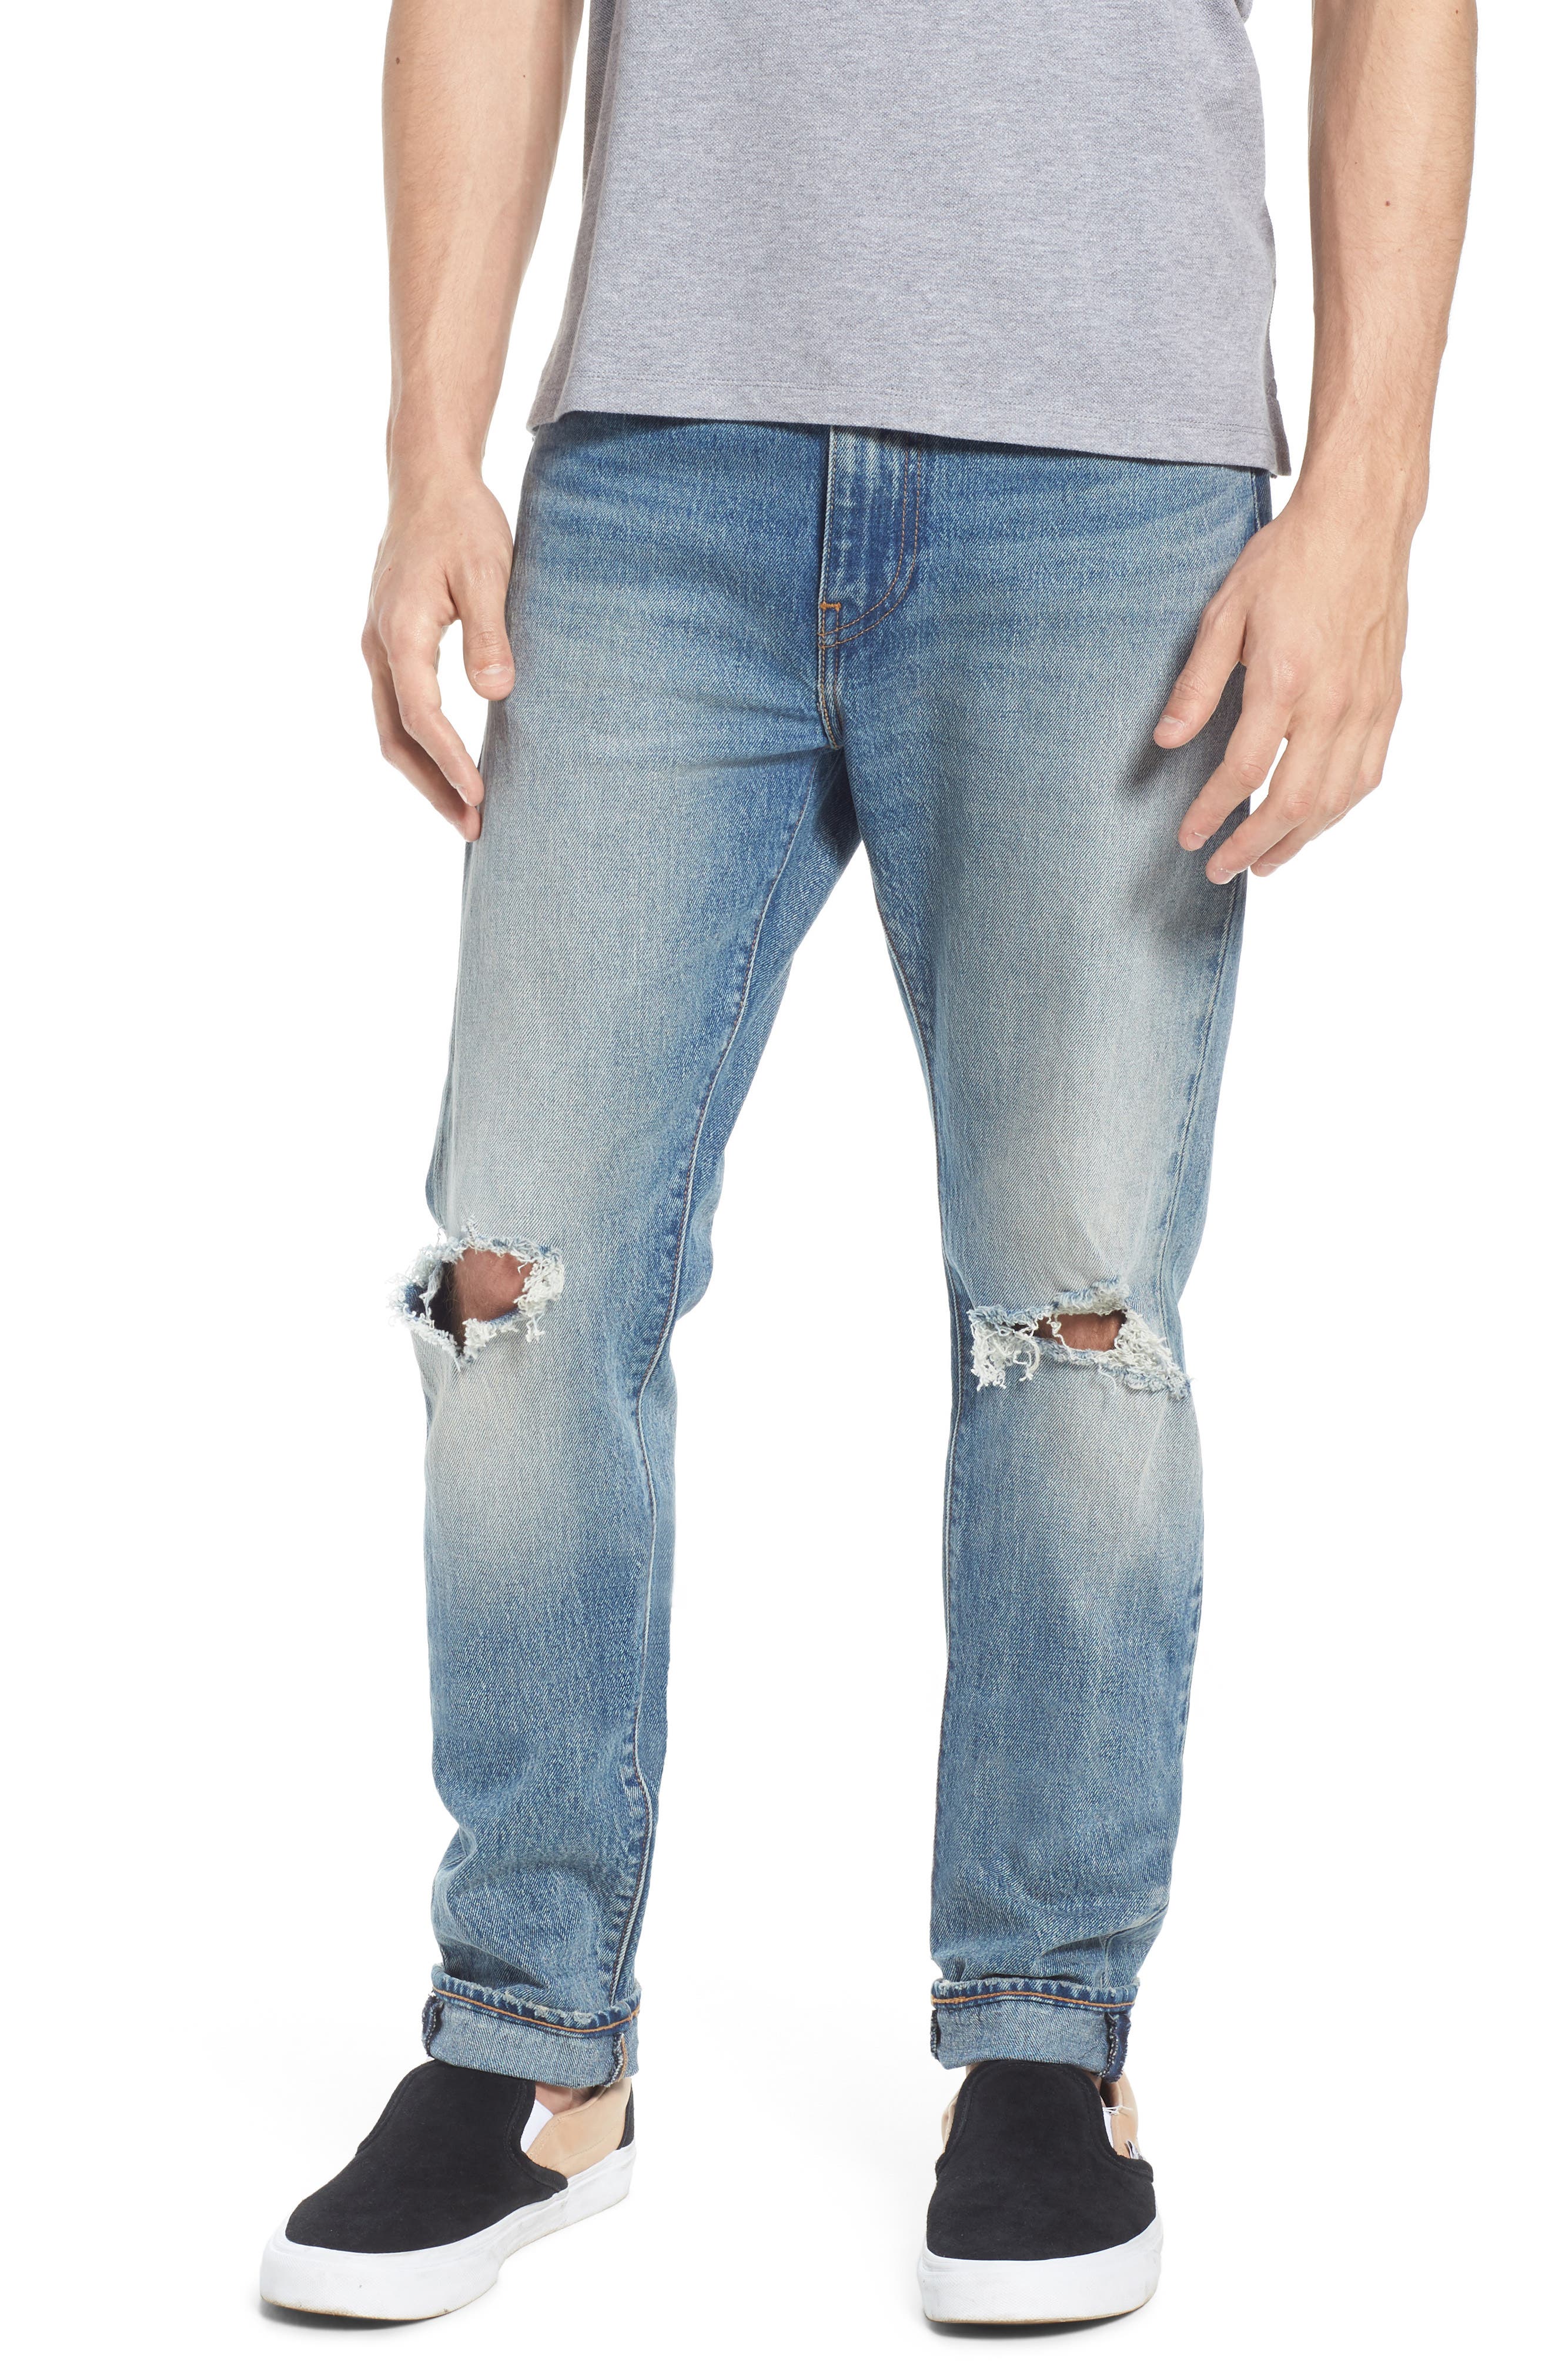 levis 510 ripped jeans